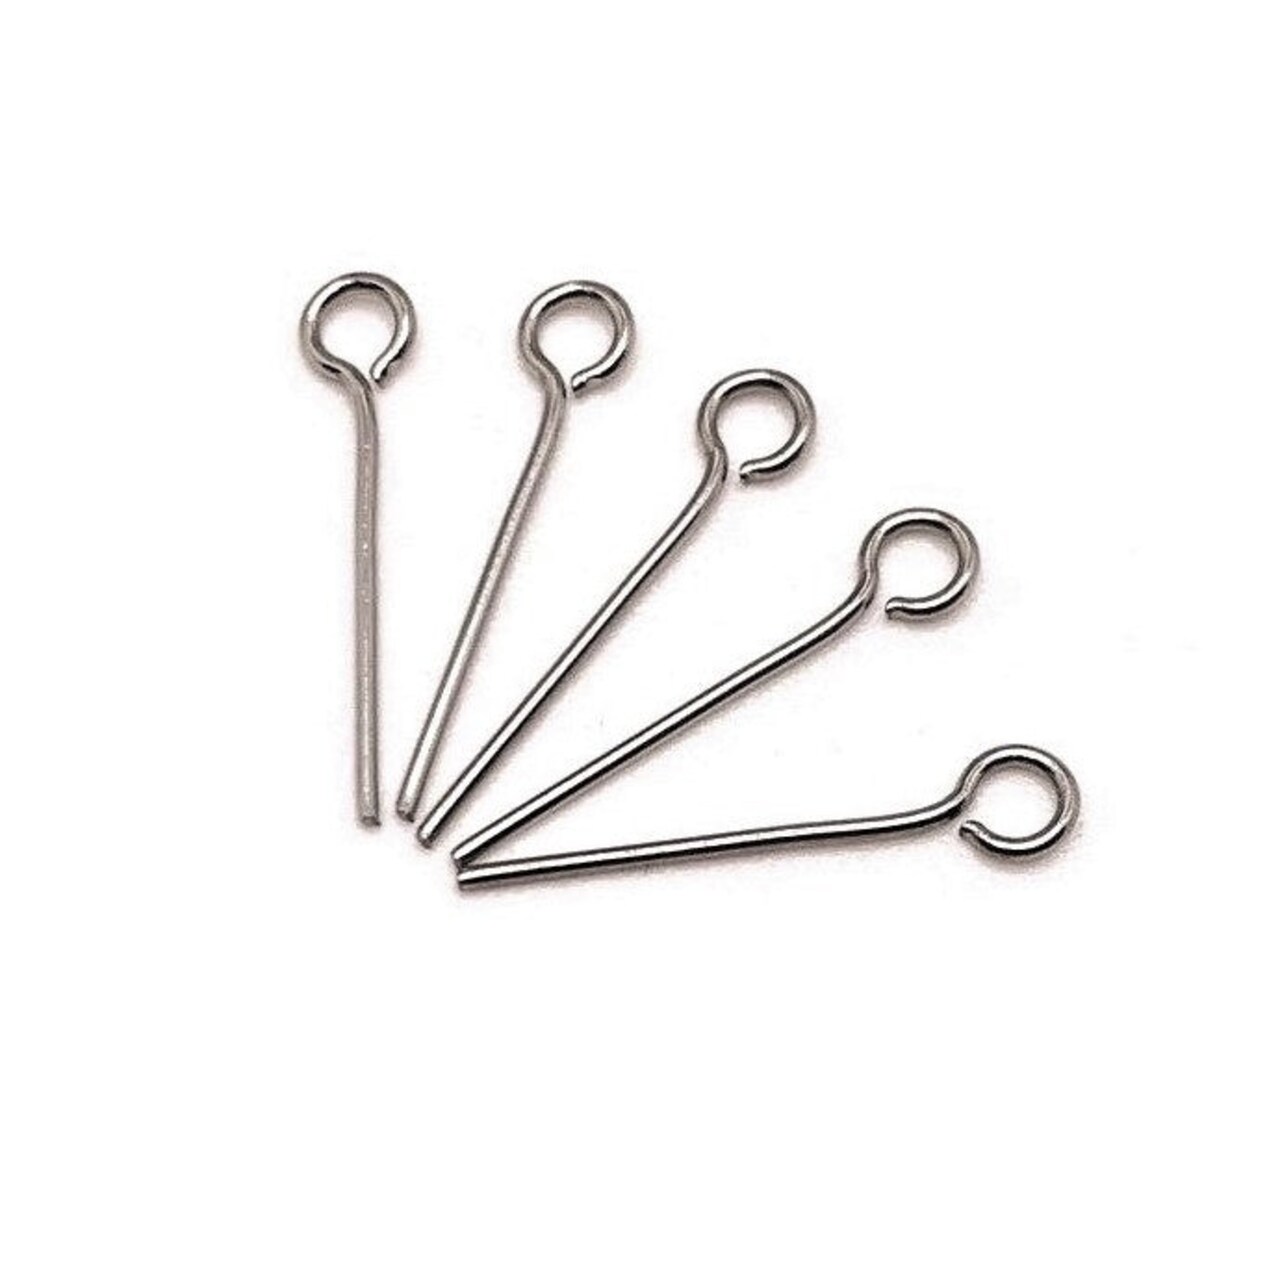 100 or 500 Pieces: 16 mm Stainless Steel Silver Eye pins, 21 gauge